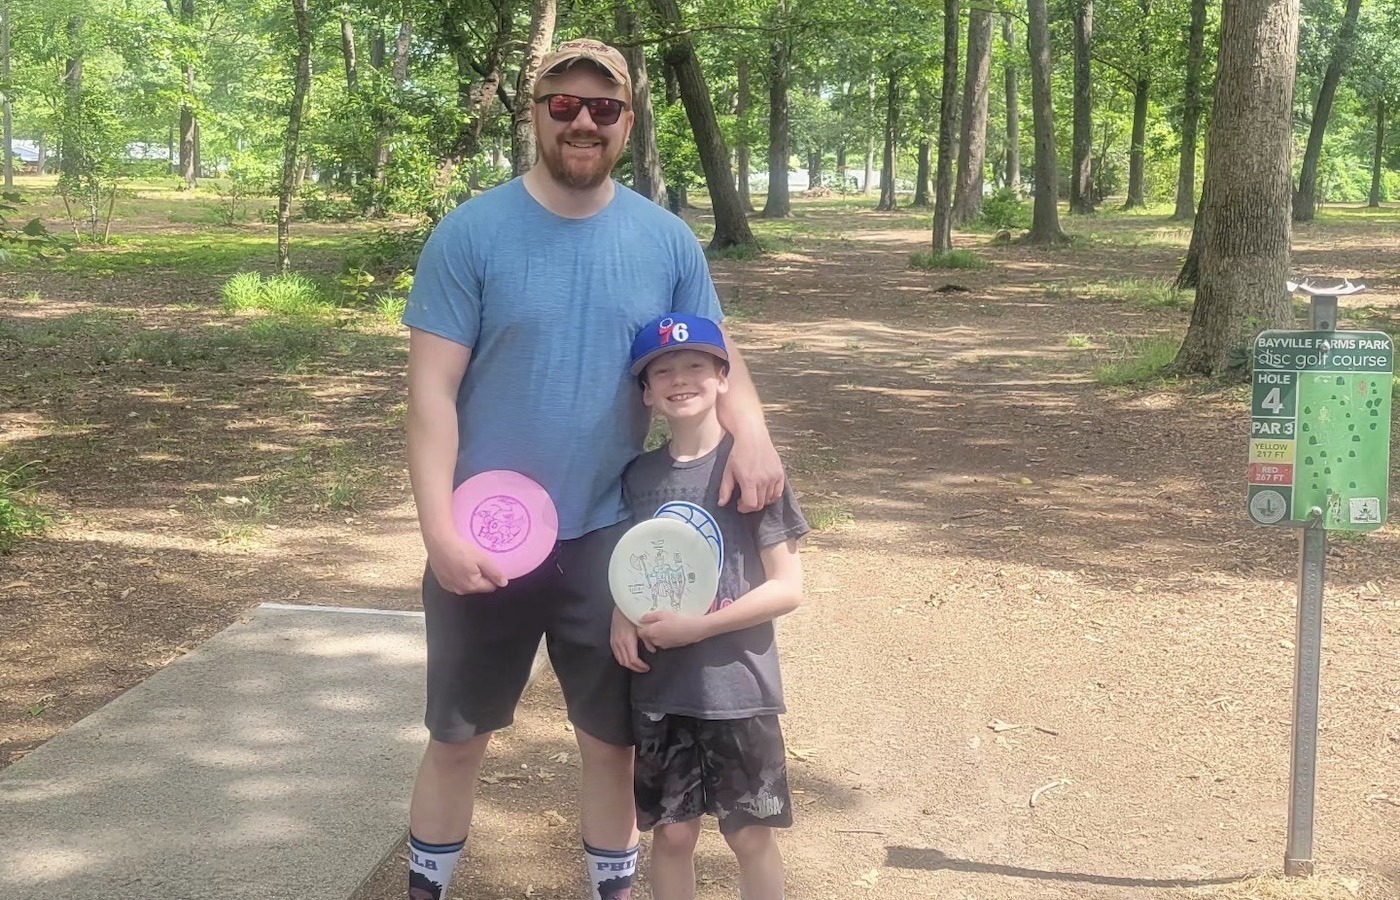 Jeff Richter and his son, Henry, at a disc golf course